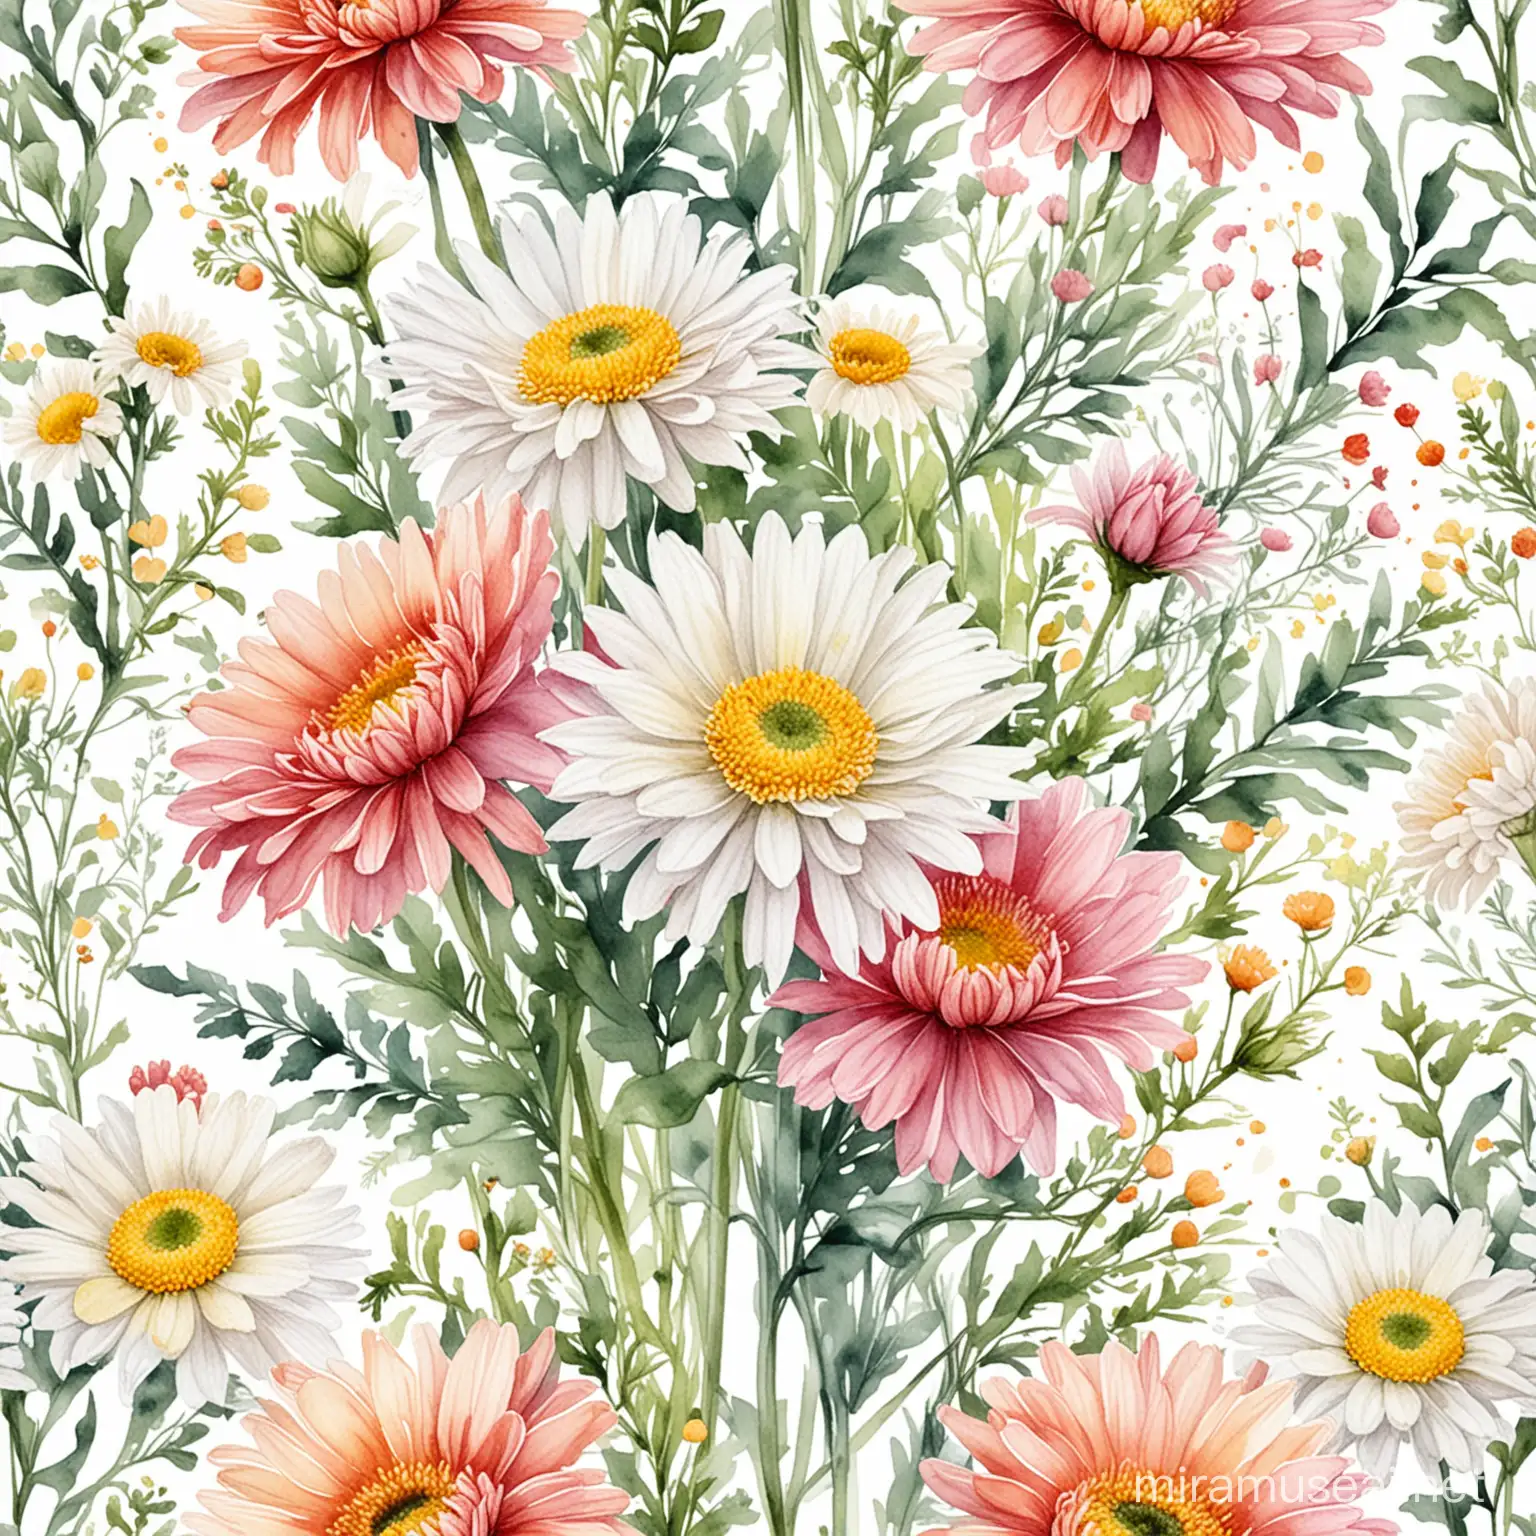 watercolor bouquet chrysanthemum, daisy, and carnation light strokes on white background
